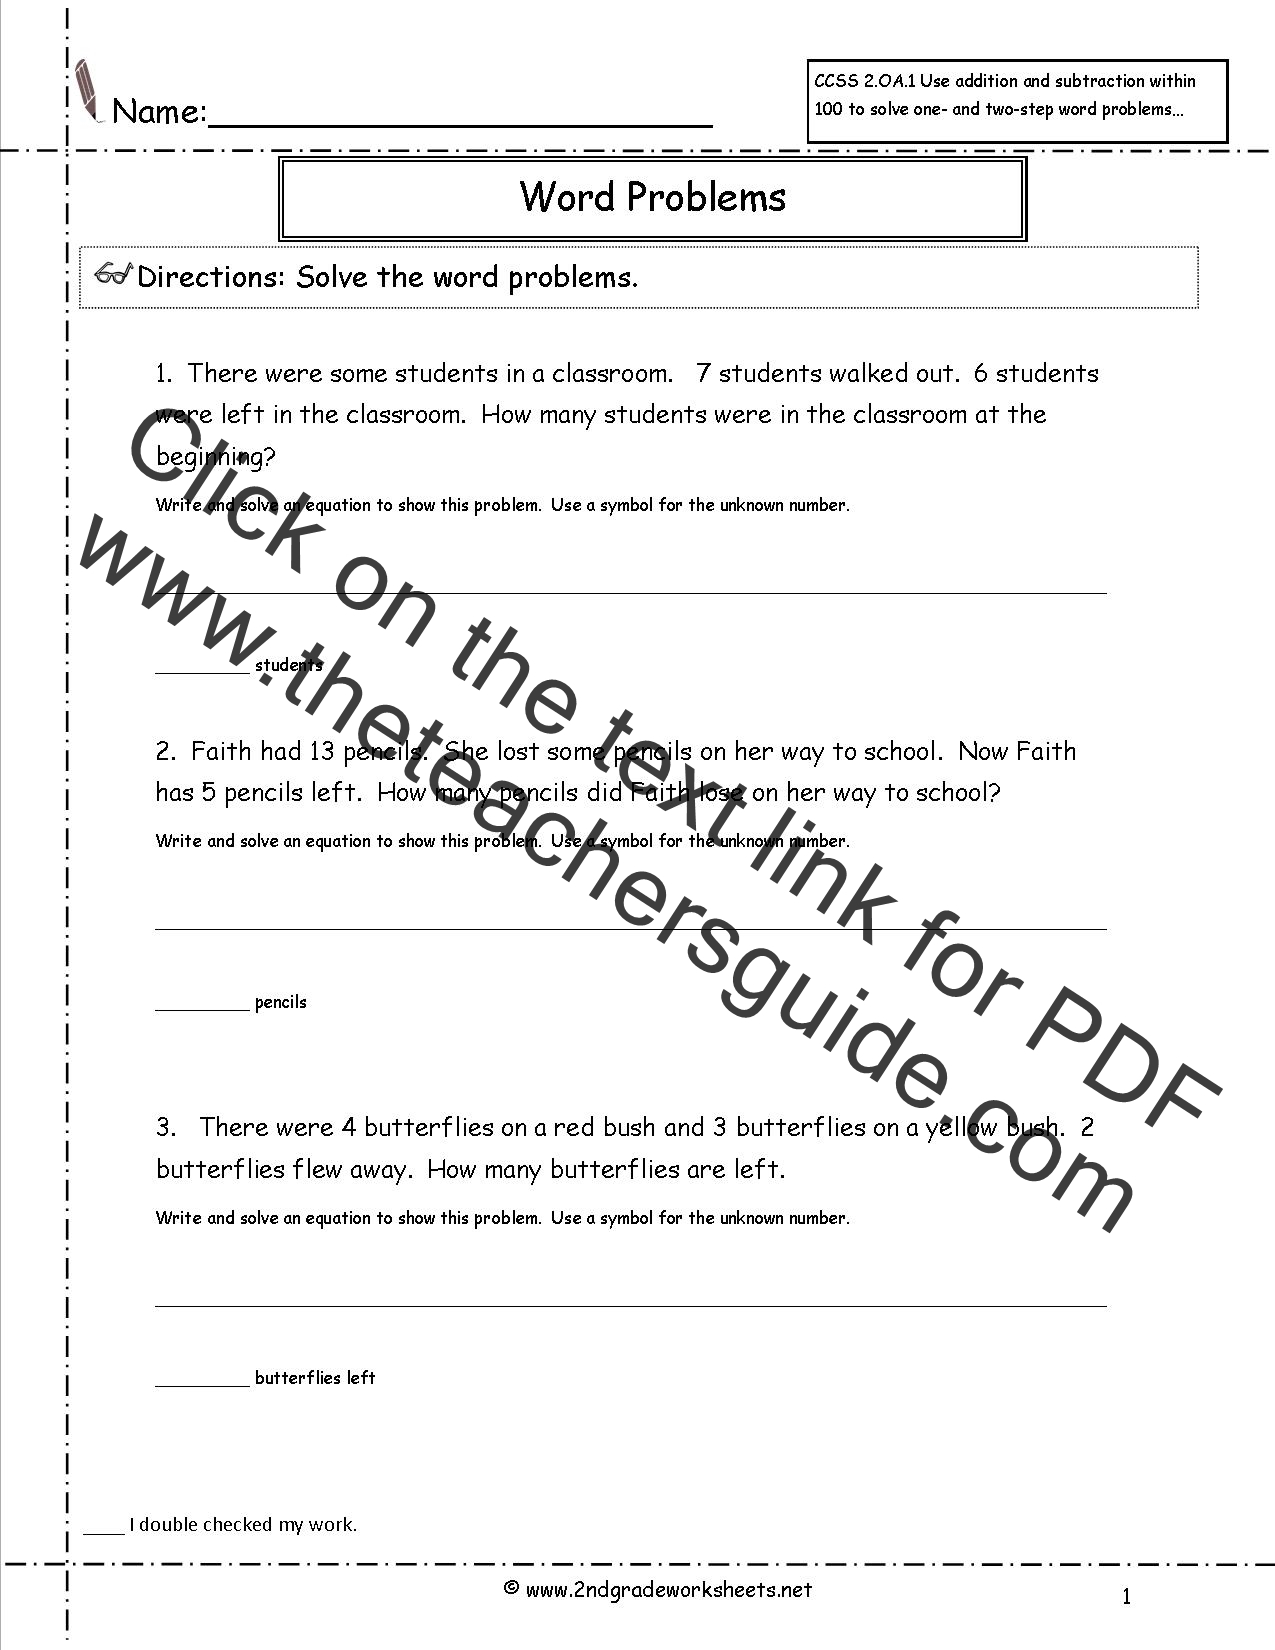 CCSS 22.OA.22 Worksheets. Addition and Subtraction Word Problems Inside Algebra 2 Word Problems Worksheet